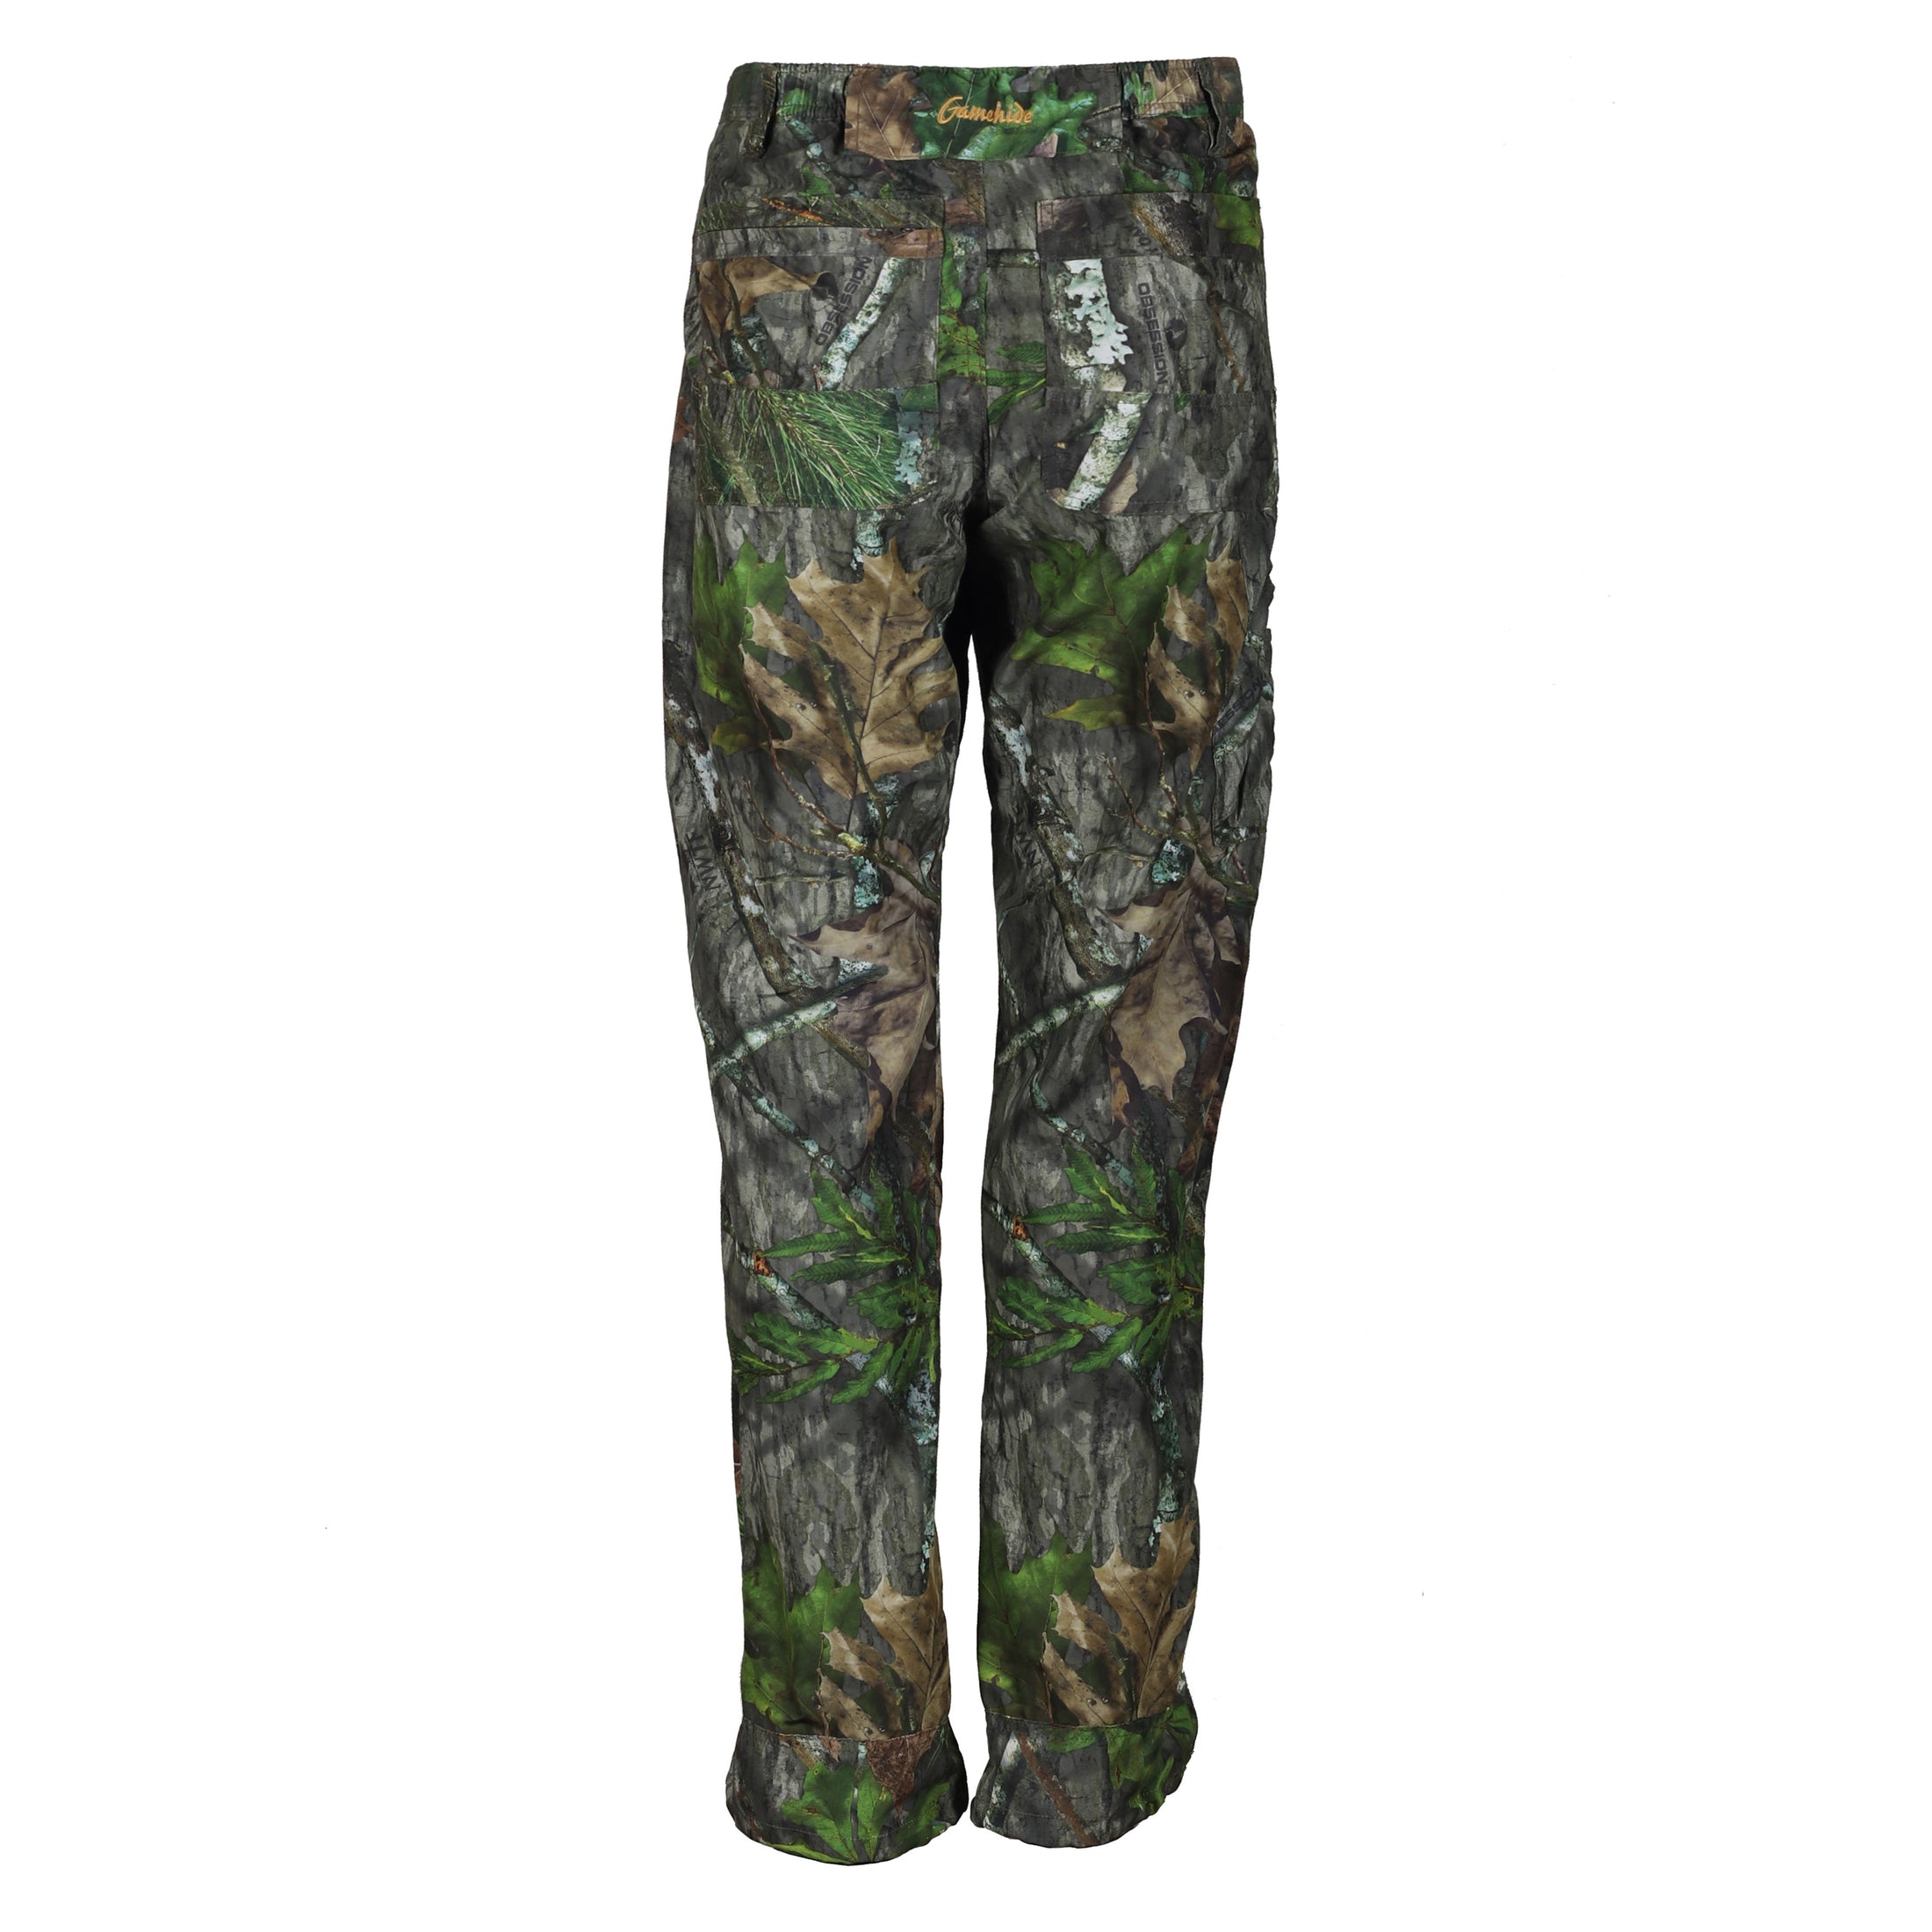 gamehide ElimiTick Insect Repellent Ultra Lite Pant back (mossy oak obsession)